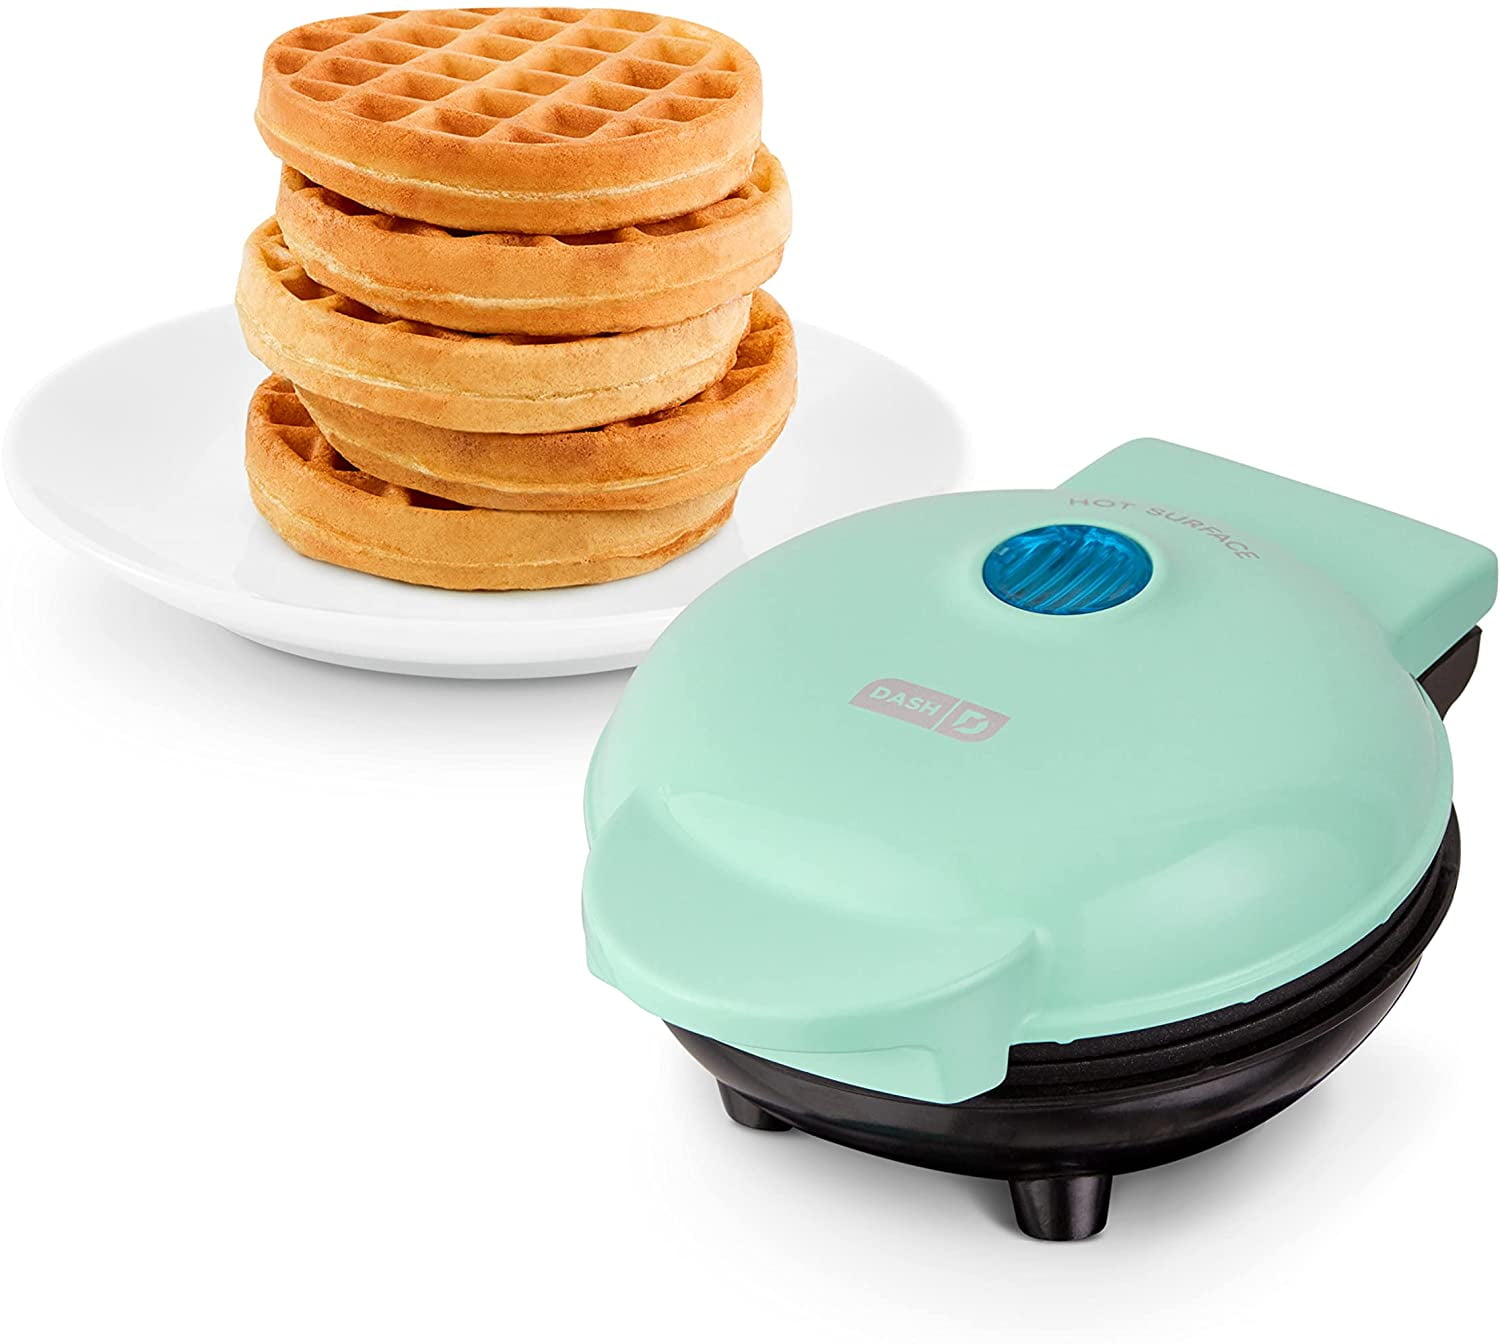 Mini Maker for Individual Waffles, Hash Browns, Pancake Maker,  Sandwich,Portable Cooking Non-stick Coa with Easy to Clean,Portable Cooking  Non-Stick Surfaces Breakfast Maker, 4 Inch